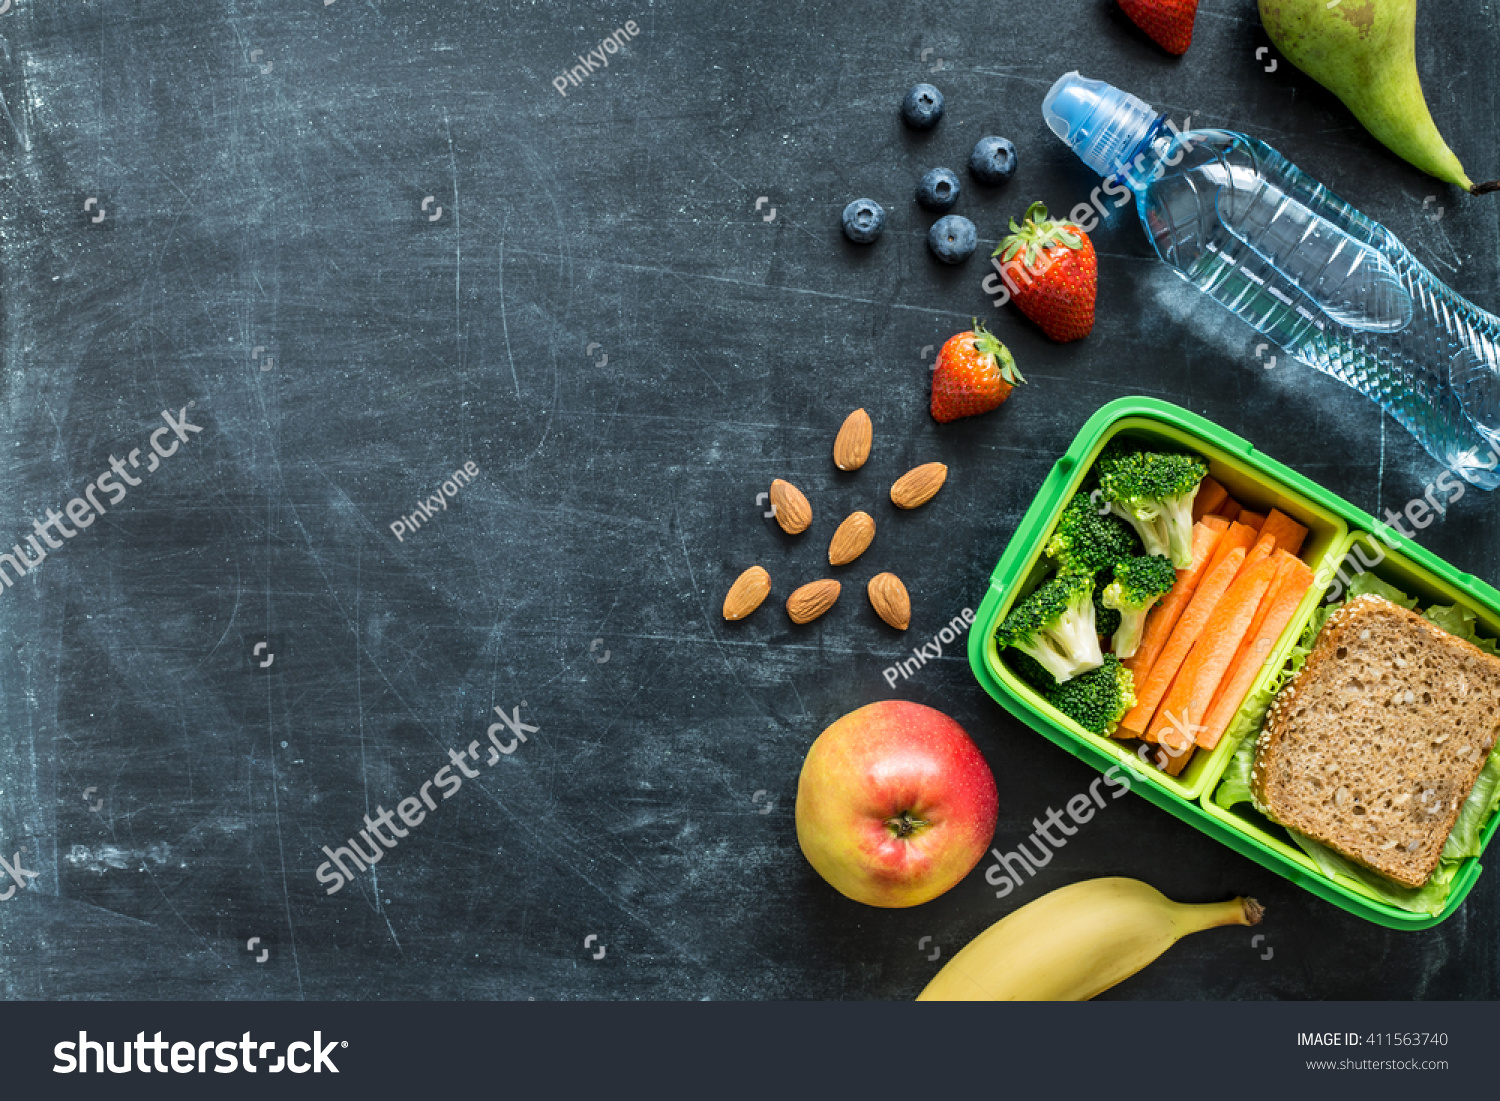 School lunch box with sandwich, vegetables, water, almonds and fruits on black chalkboard. Healthy eating habits concept - background layout with free text space. Flat lay composition (top view). #411563740